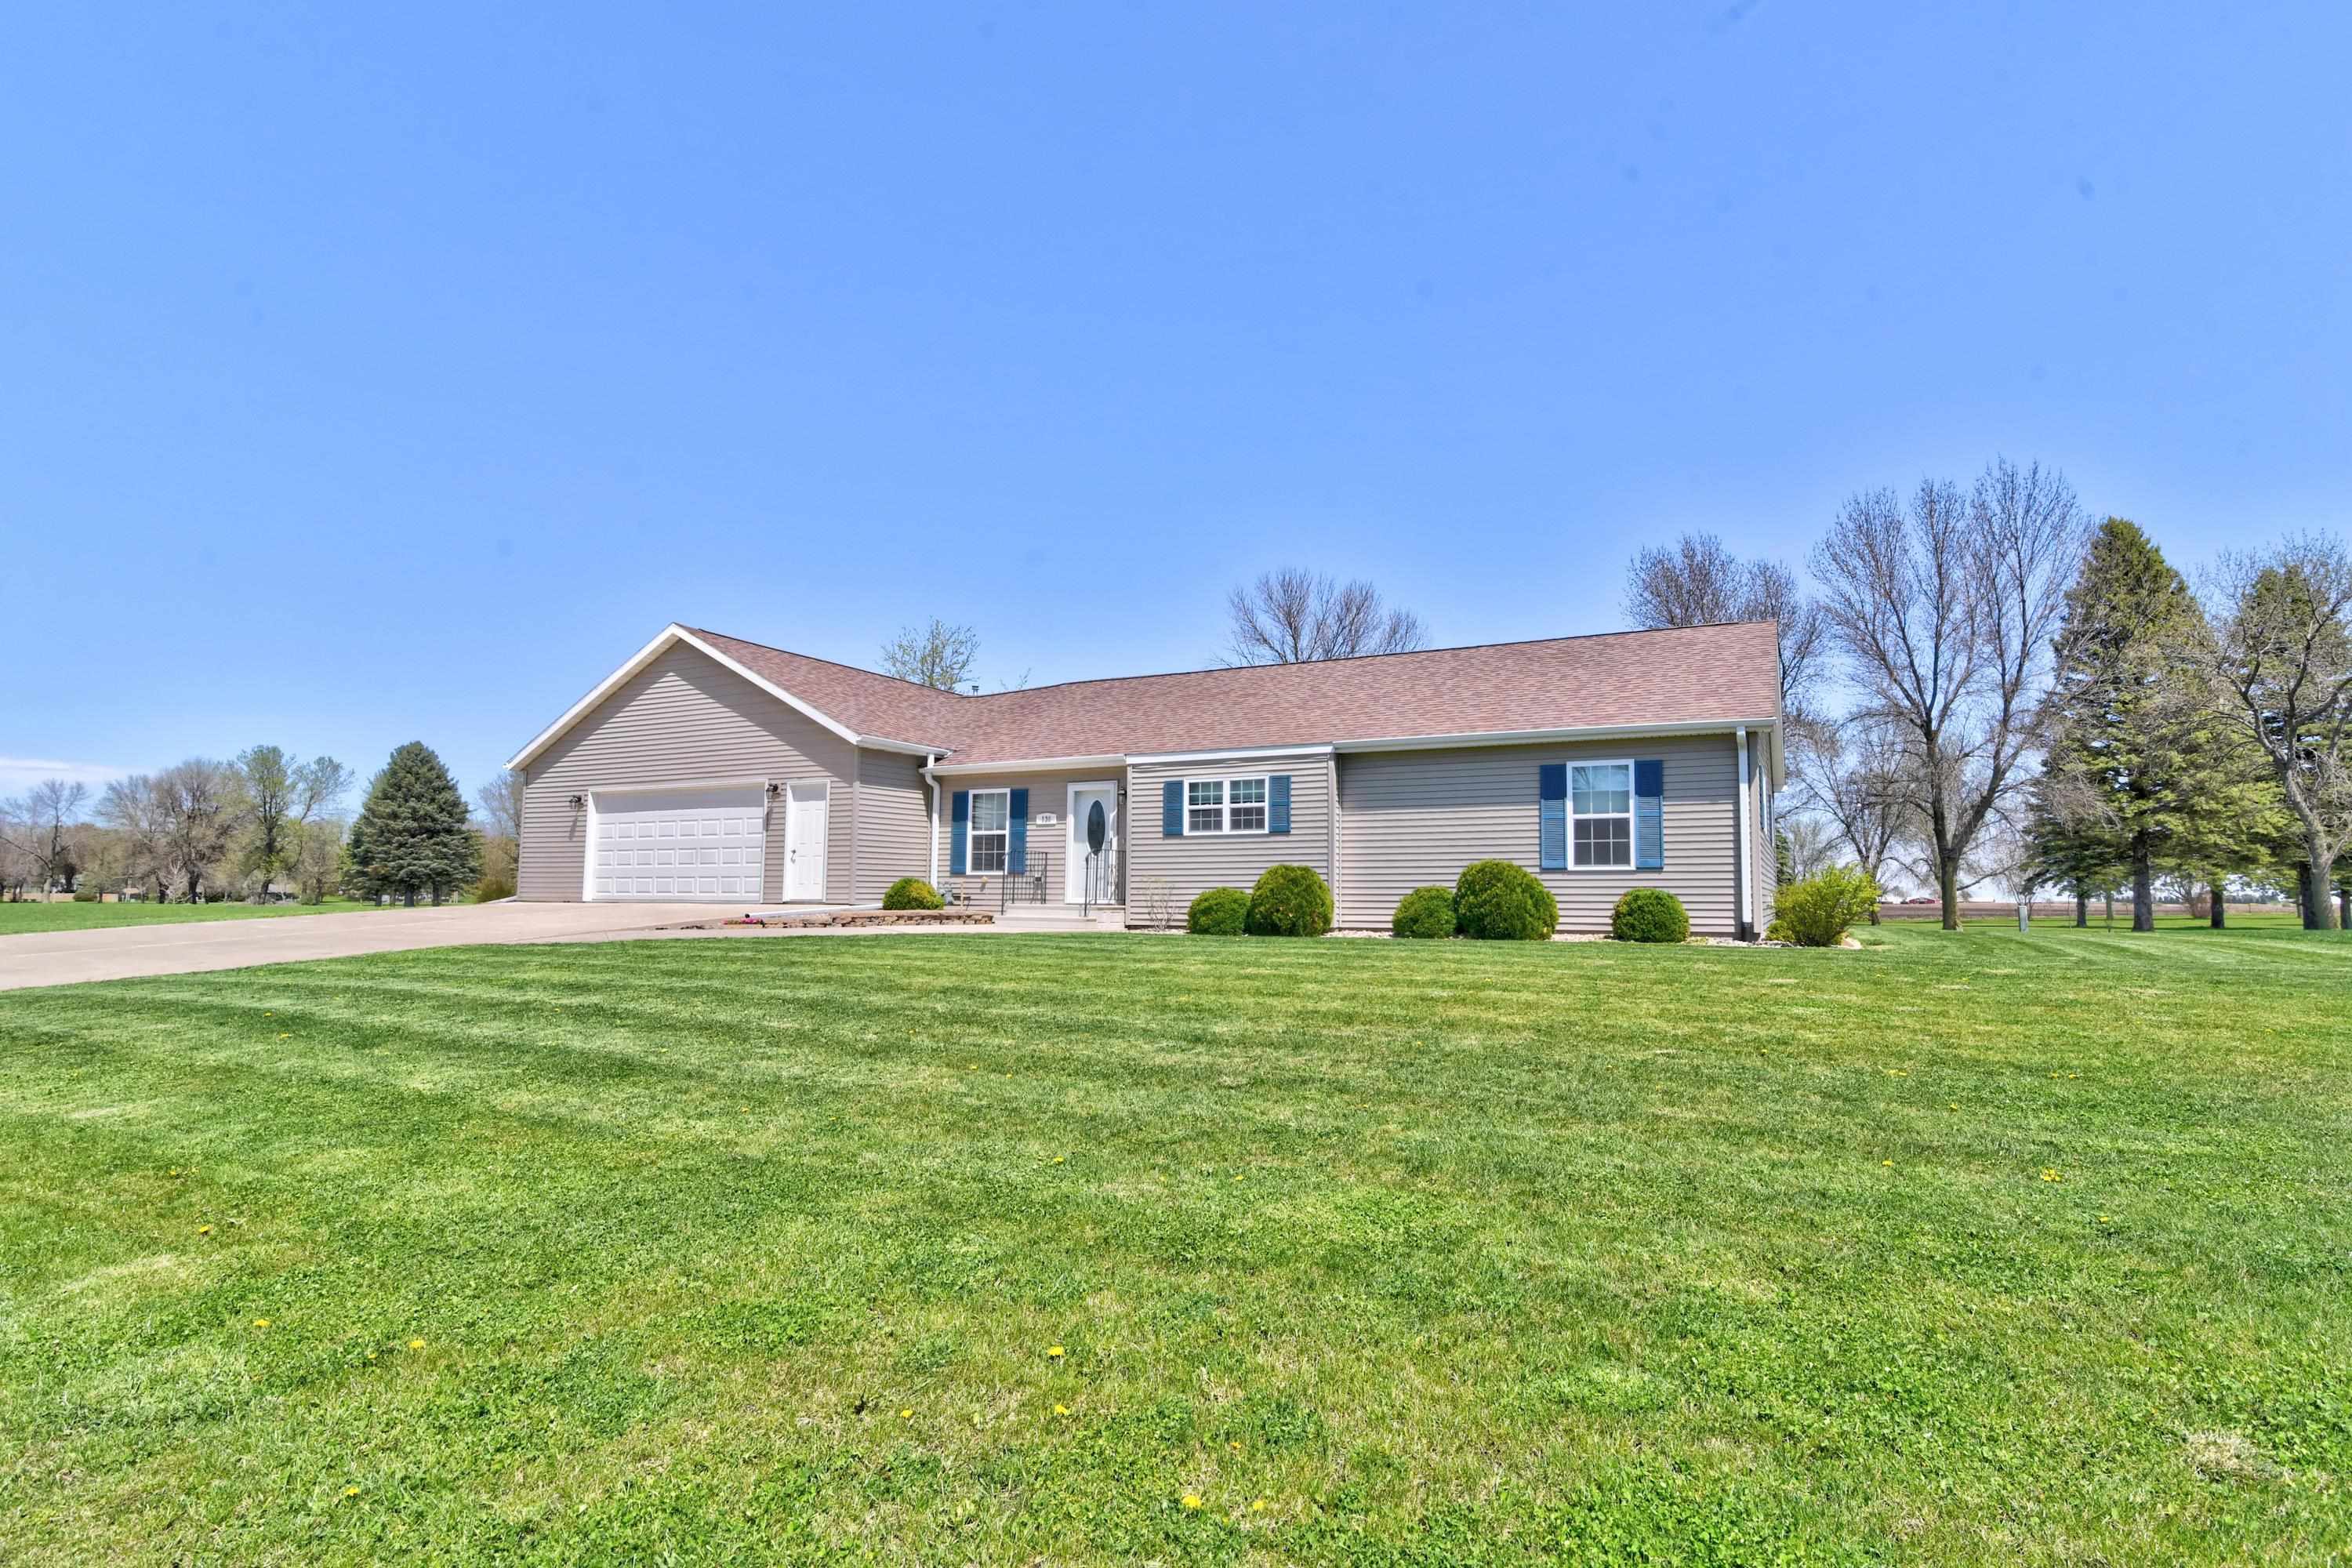 136 Golf Course Drive, Armstrong, IA 50514 